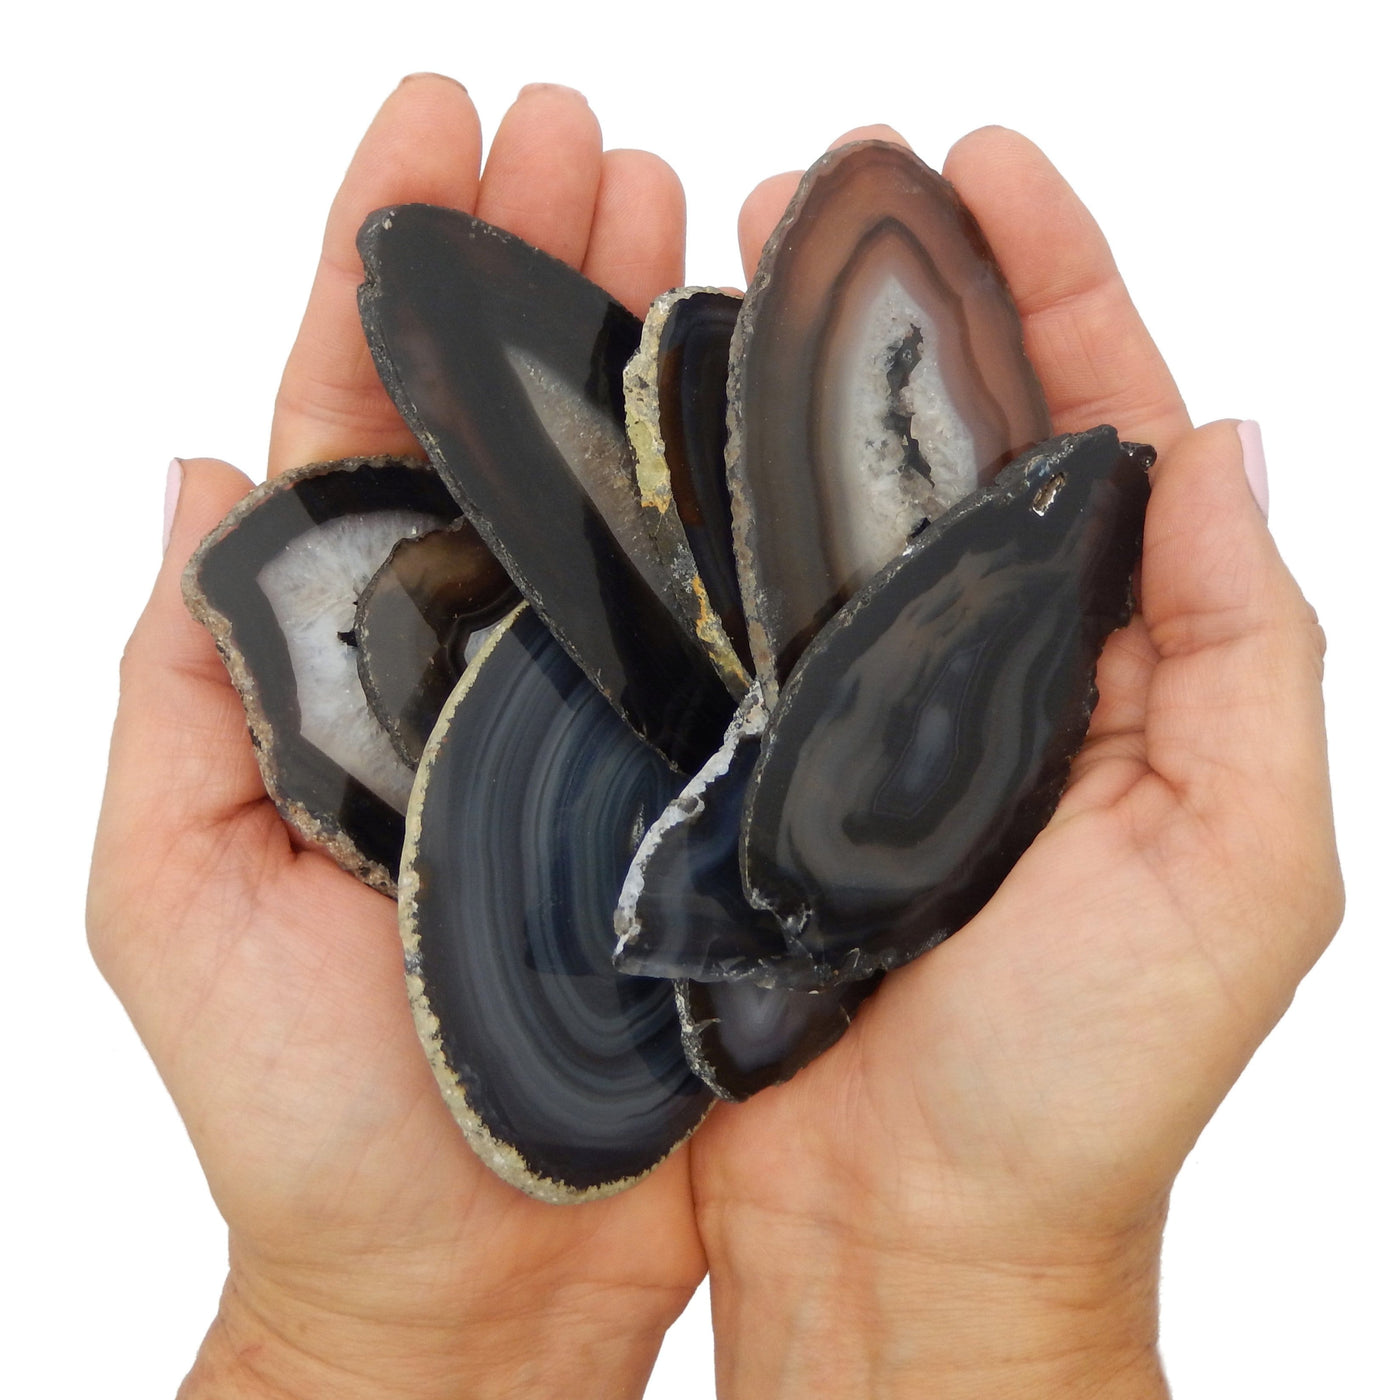 Two Hands holding up the variety of Black Agate Slice Coaster